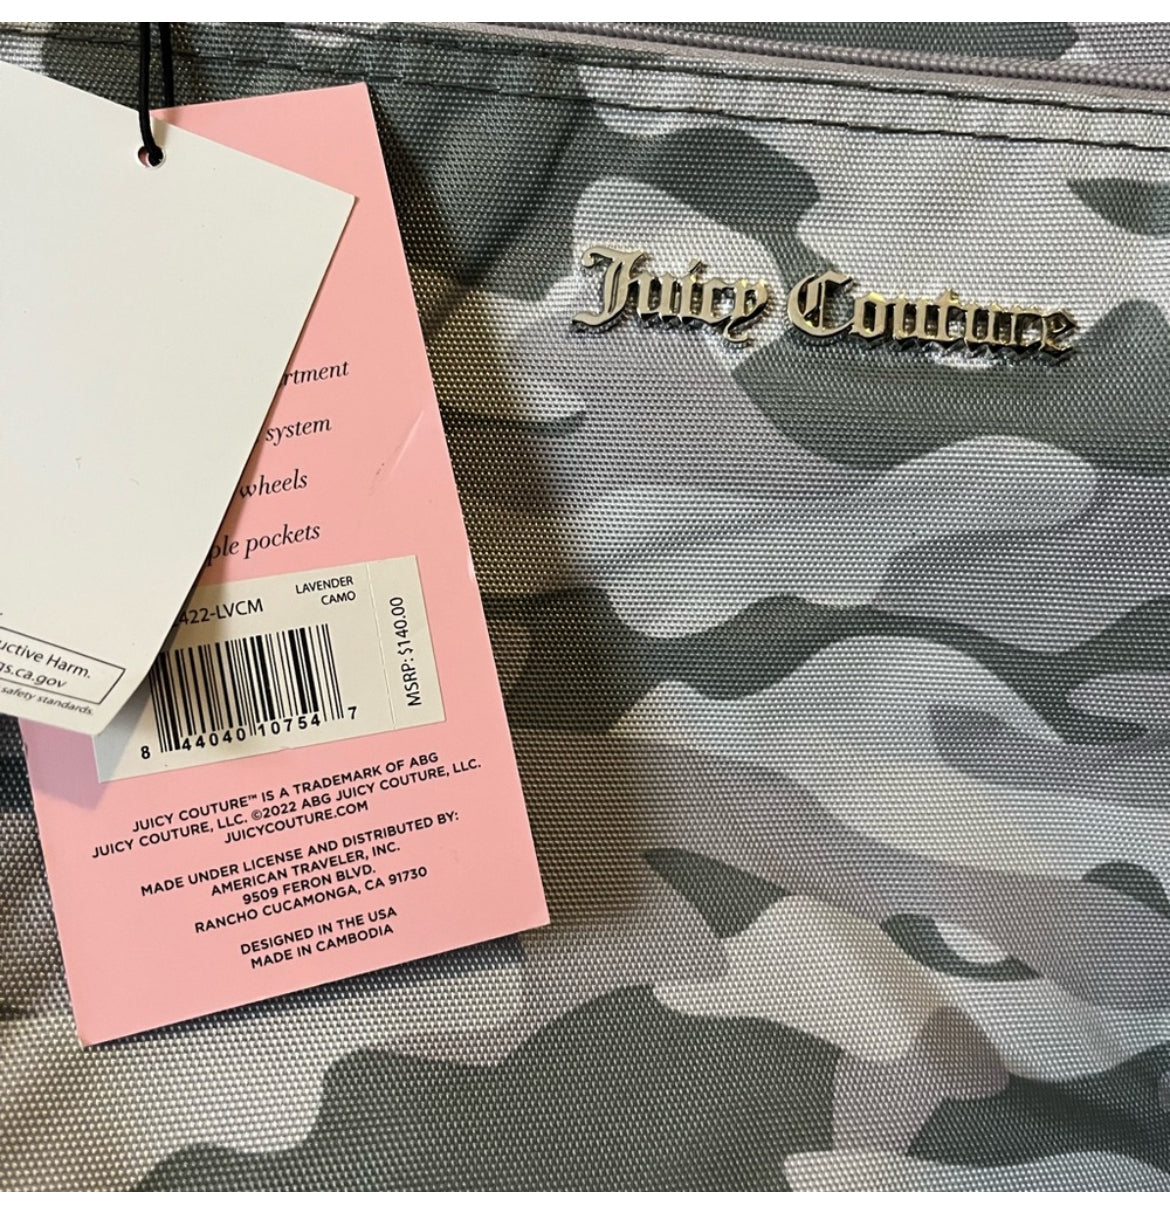 JUICY COUTURE TRAVEL BAG